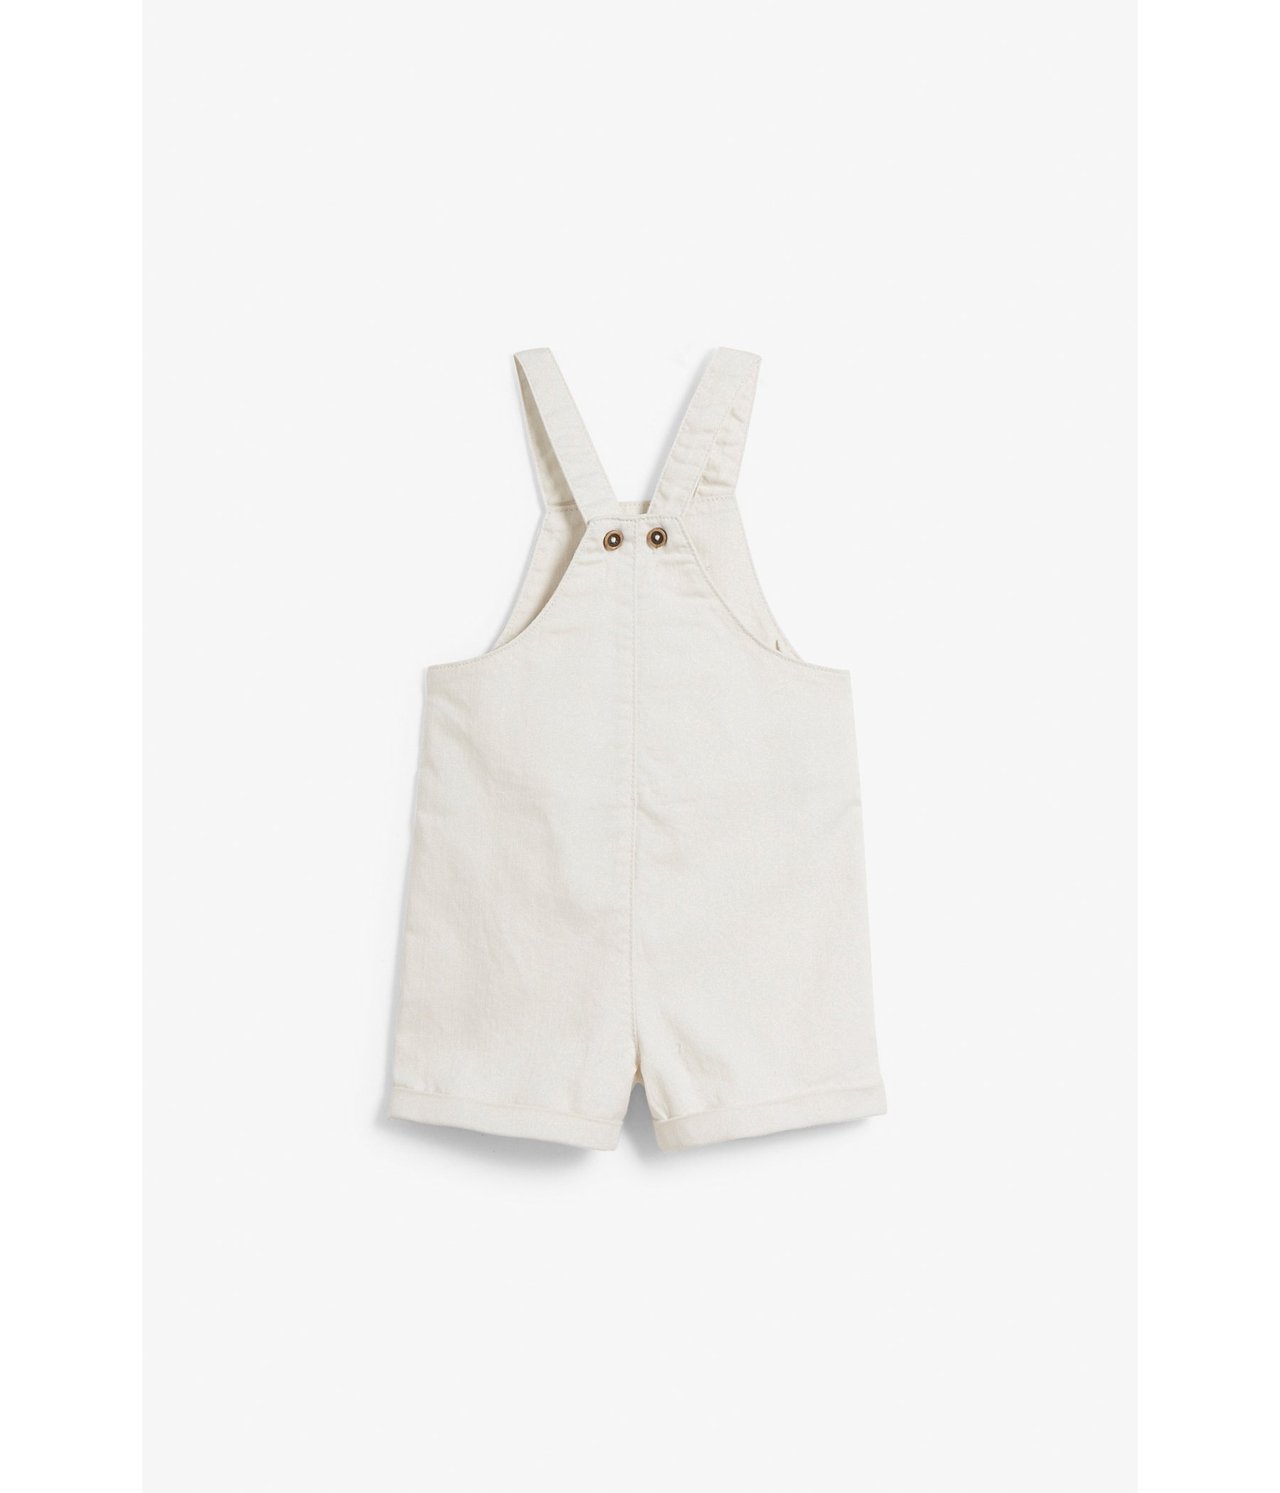 Hängselshorts baby Offwhite - null - 6